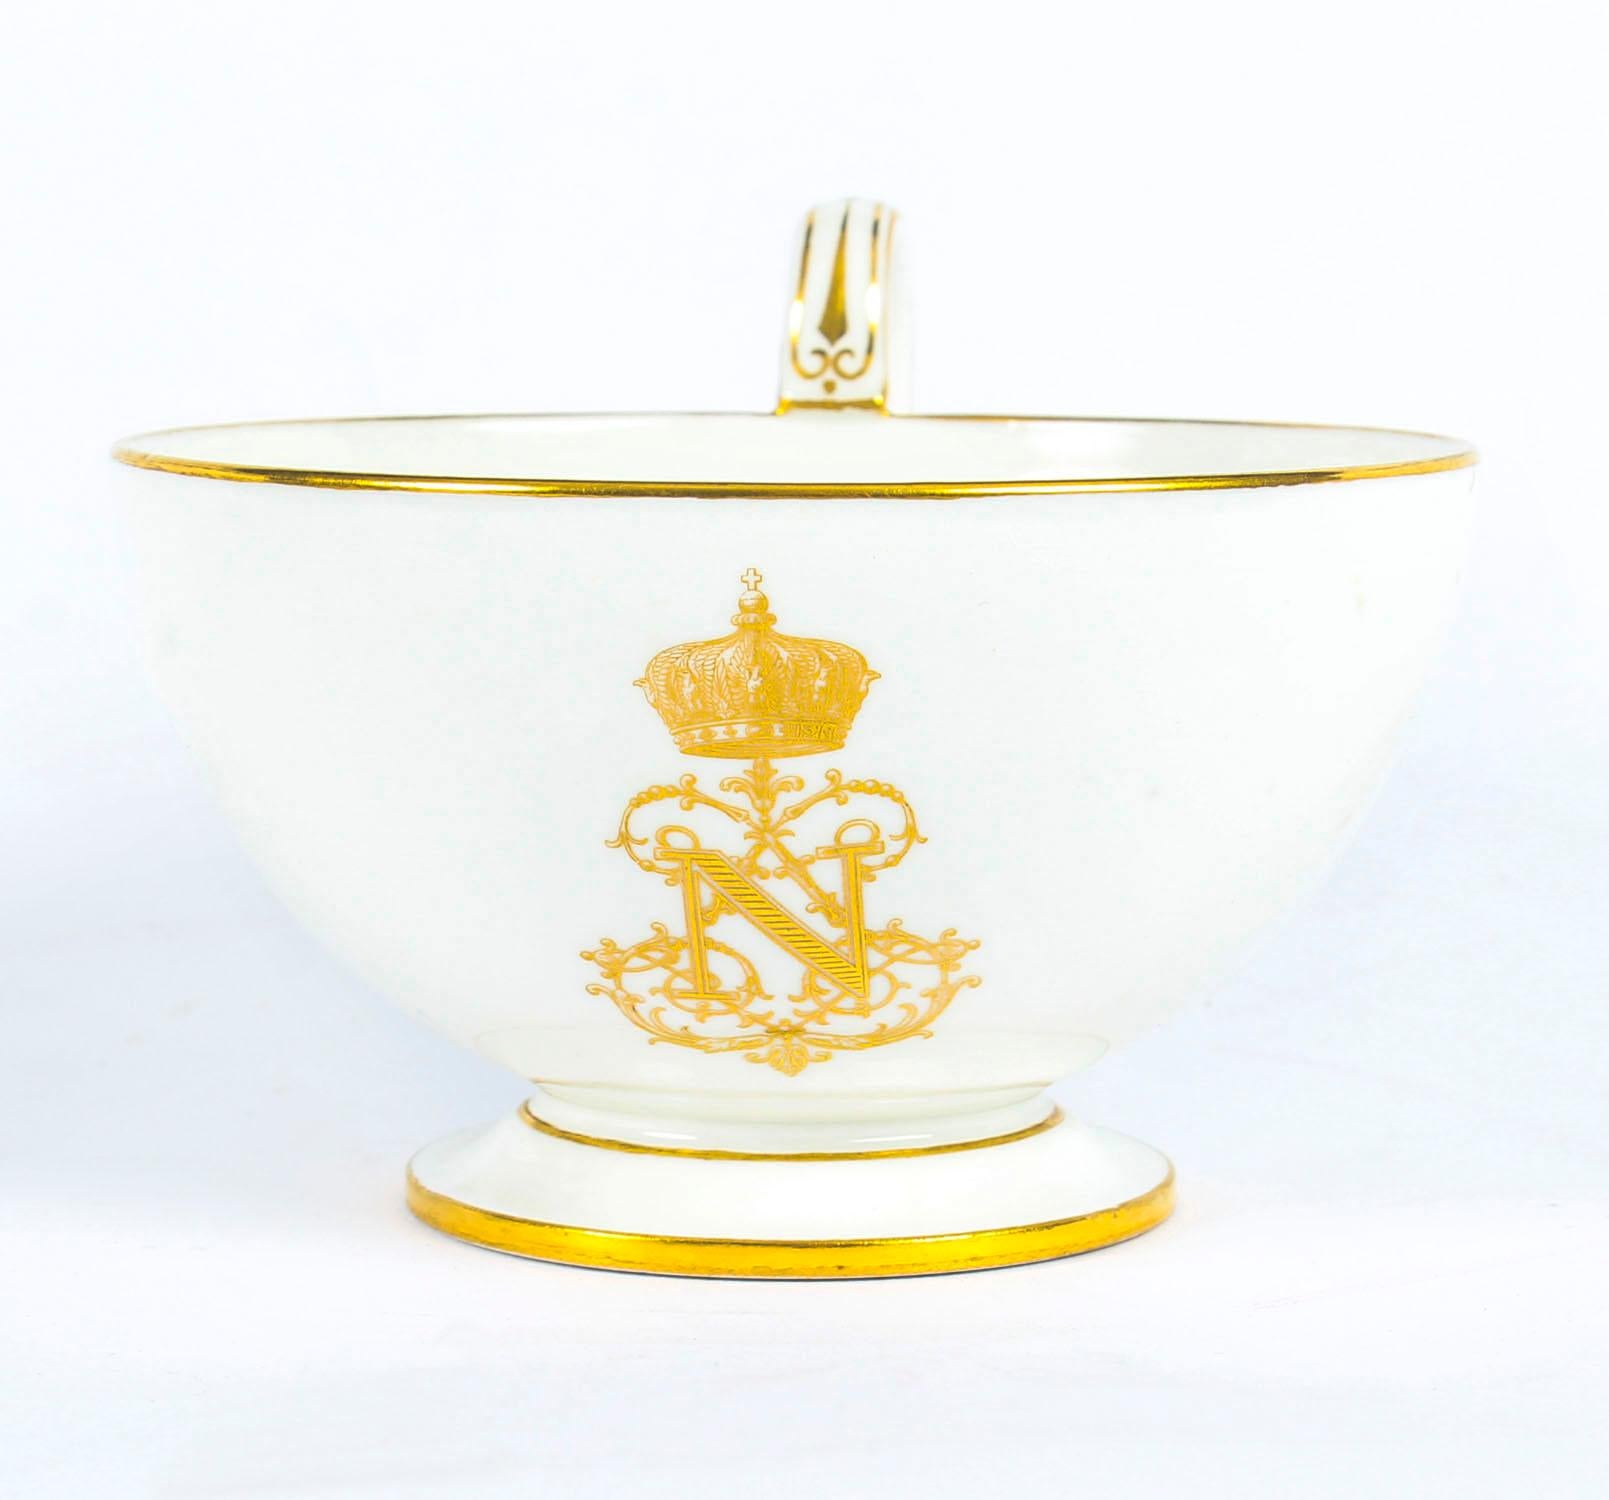 This is an important fine Sèvres Porcelain breakfast cup and saucer with gilt crowned N cipher and gilt line borders on white ground, bearing the red Imperial crowned N Sèvres mark and date letter for 1859.

This is sure to be a treasured addition